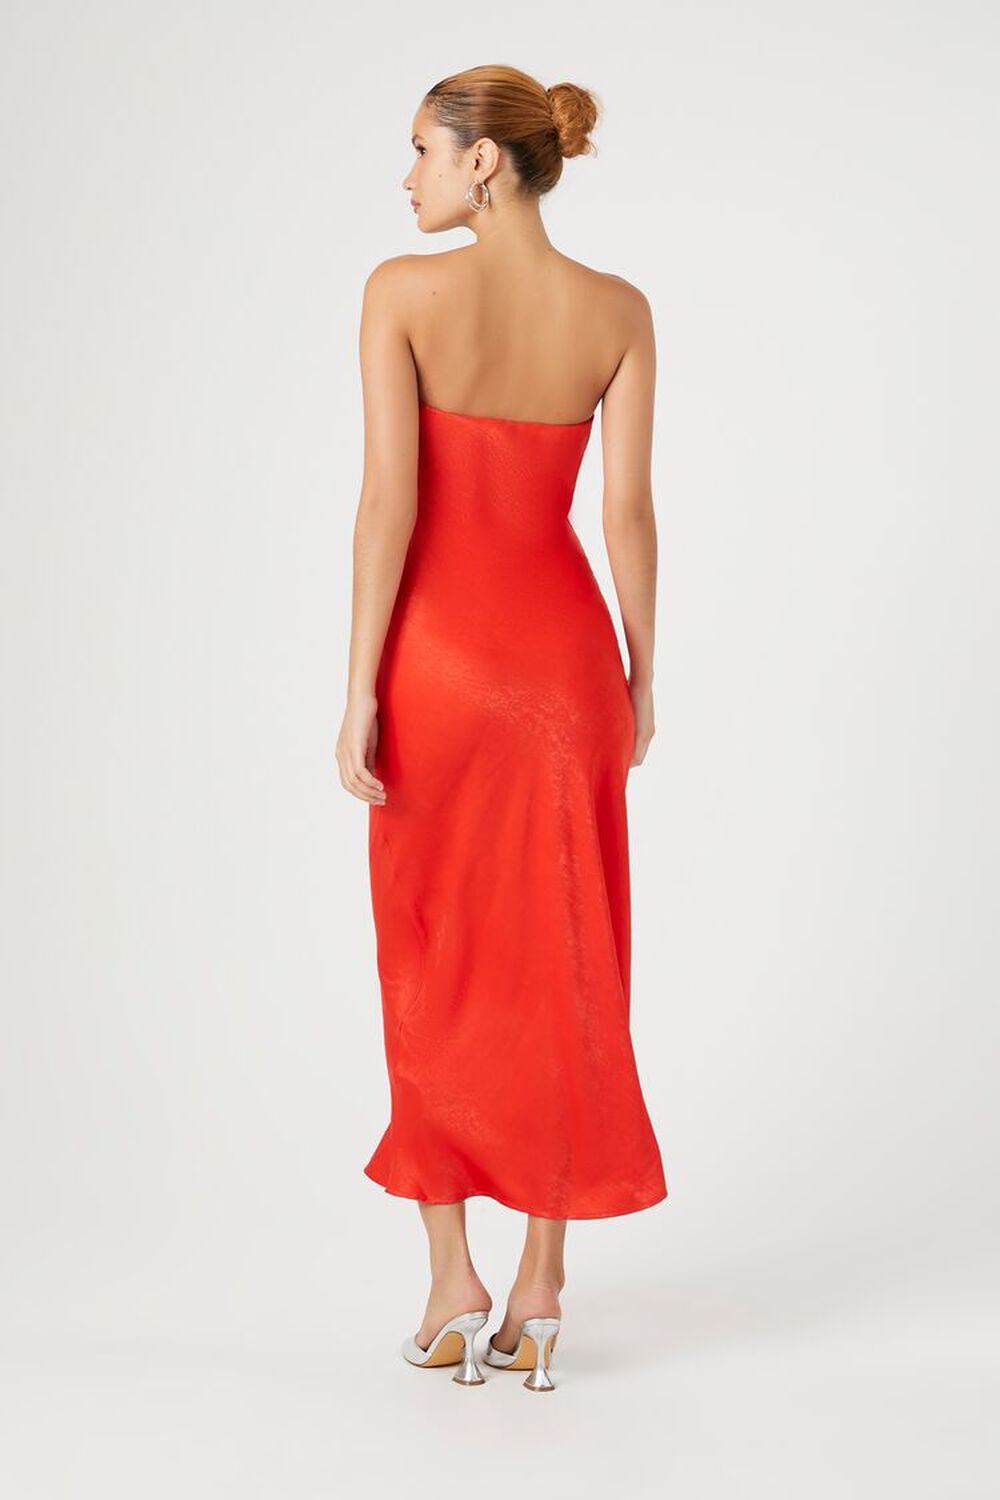 FIERY RED Satin Strapless Maxi Dress, image 3